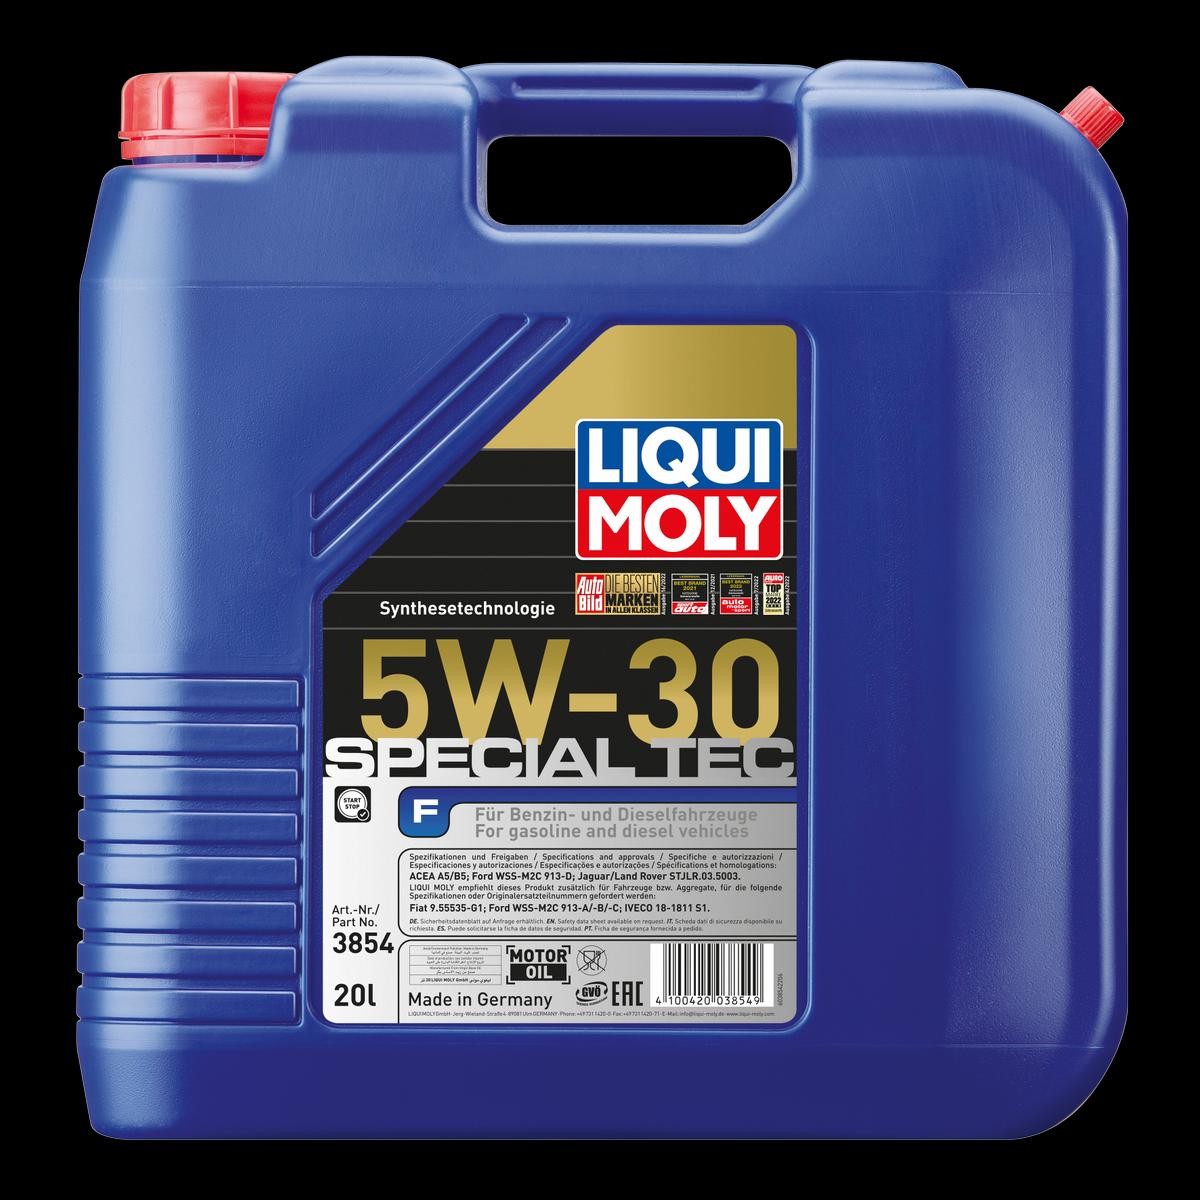 Great value for money - LIQUI MOLY Engine oil 3854